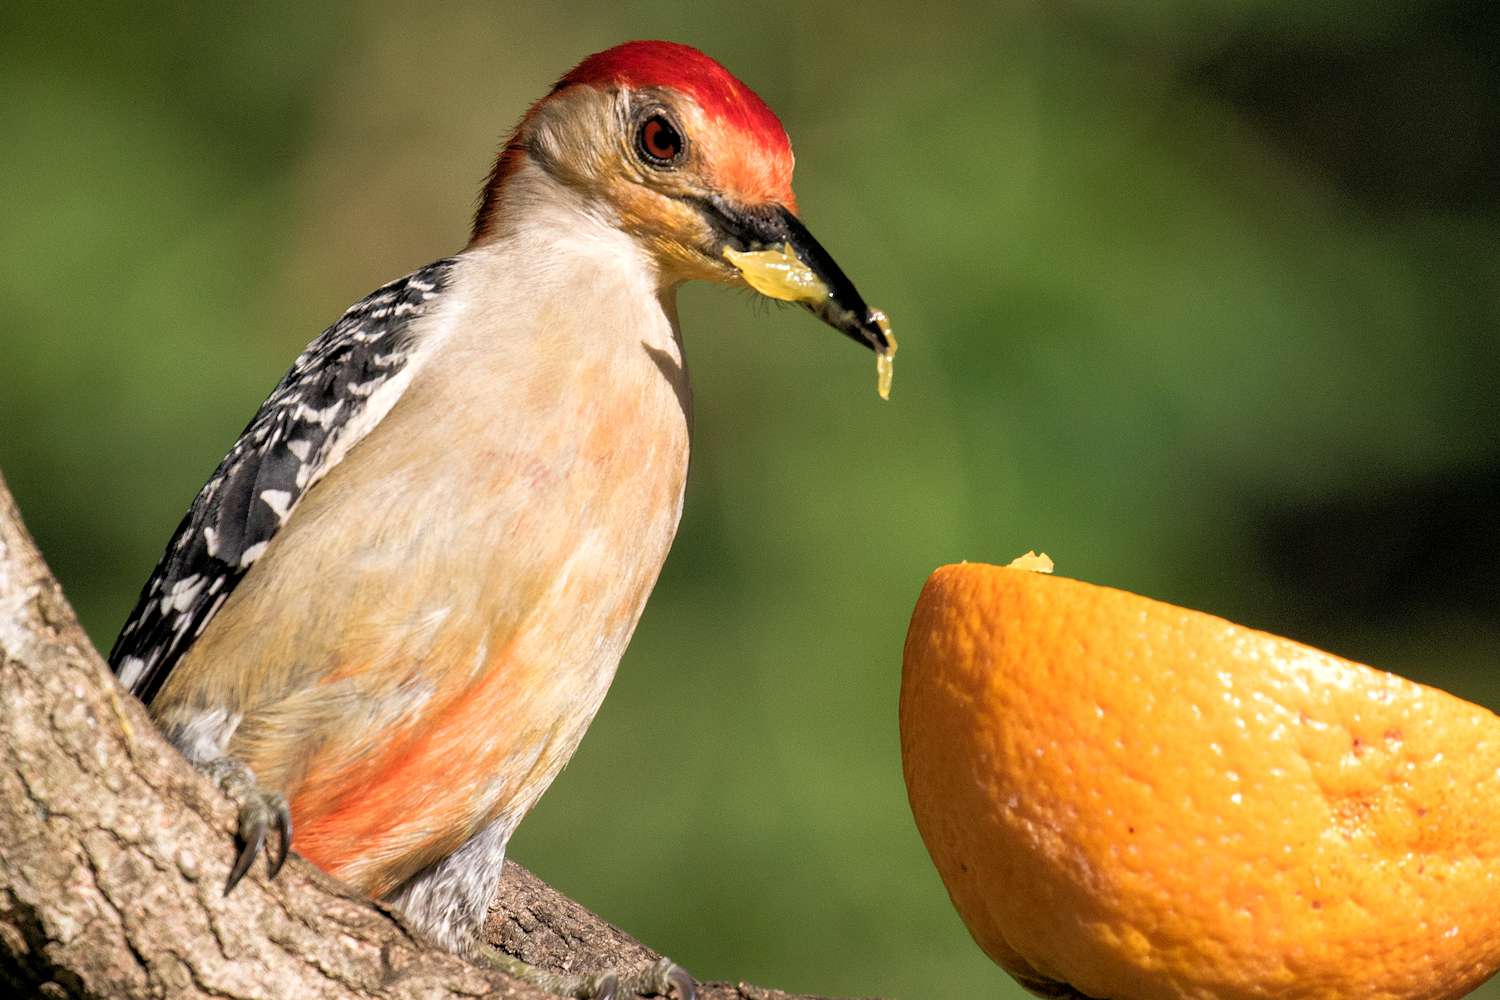 What Insects Do Woodpeckers Eat